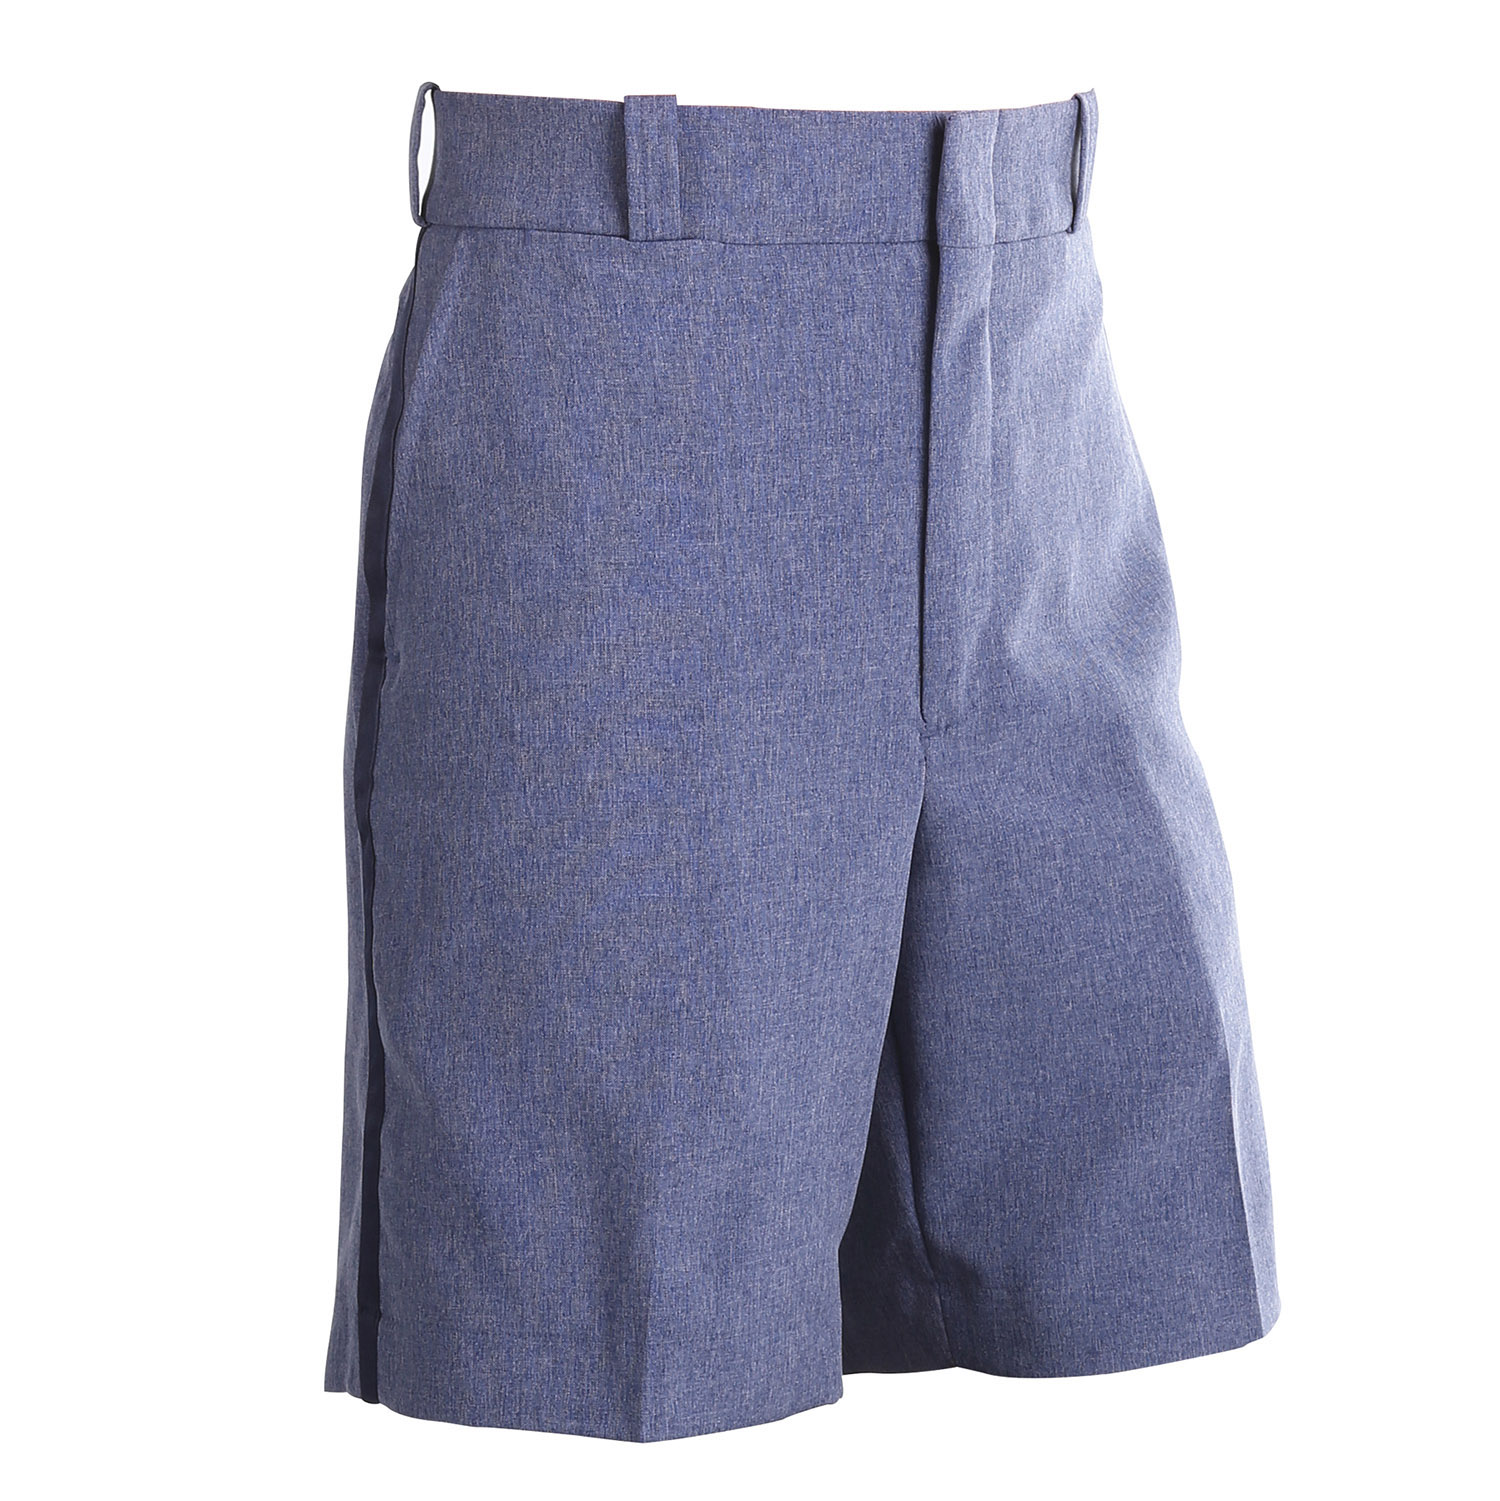 Comfort Cut Mens Postal Walking Shorts for Letter Carriers a